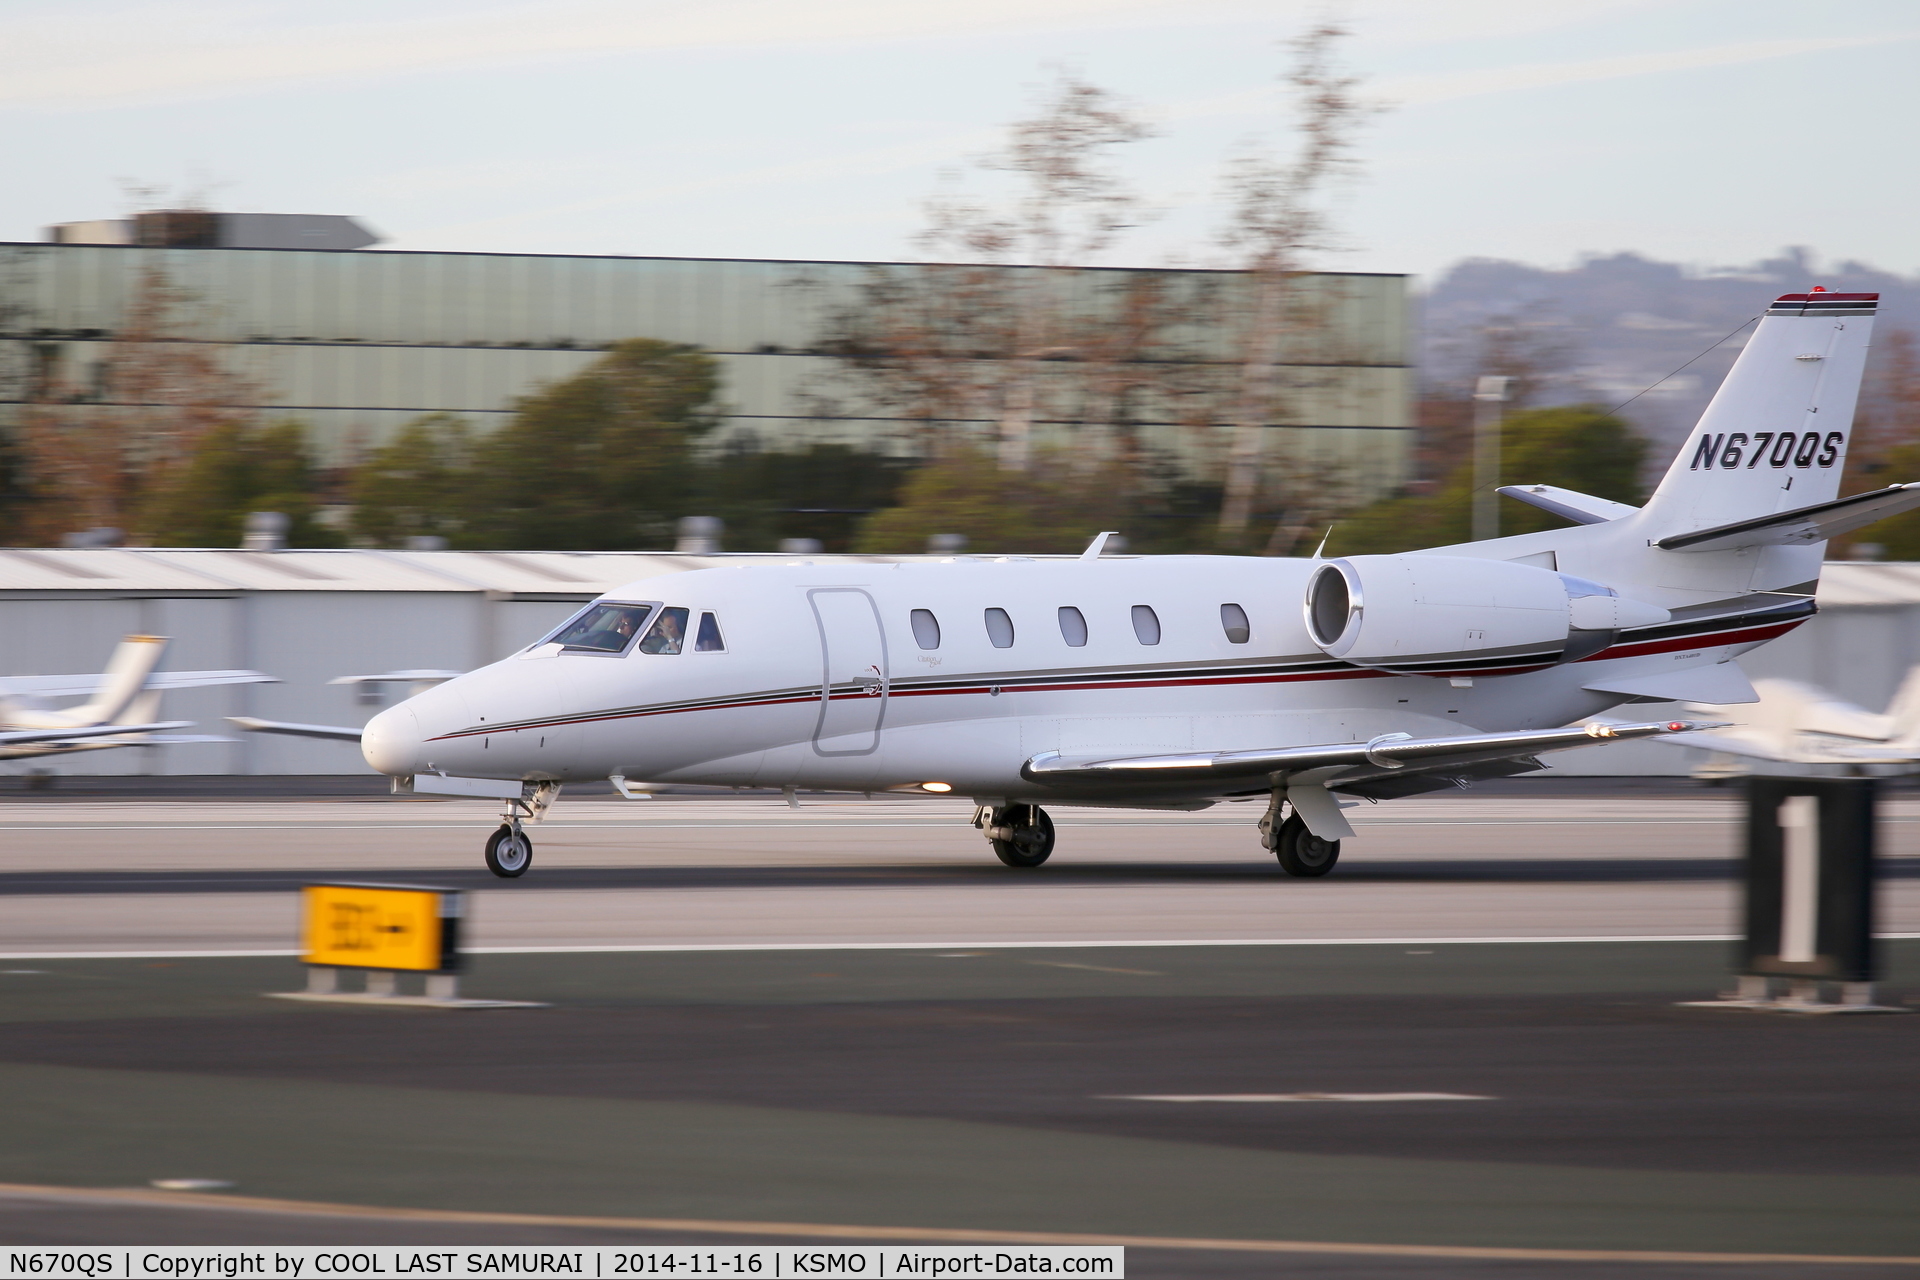 N670QS, 2001 Cessna 560XL Citation Excel C/N 560-5170, departing from Rwy21